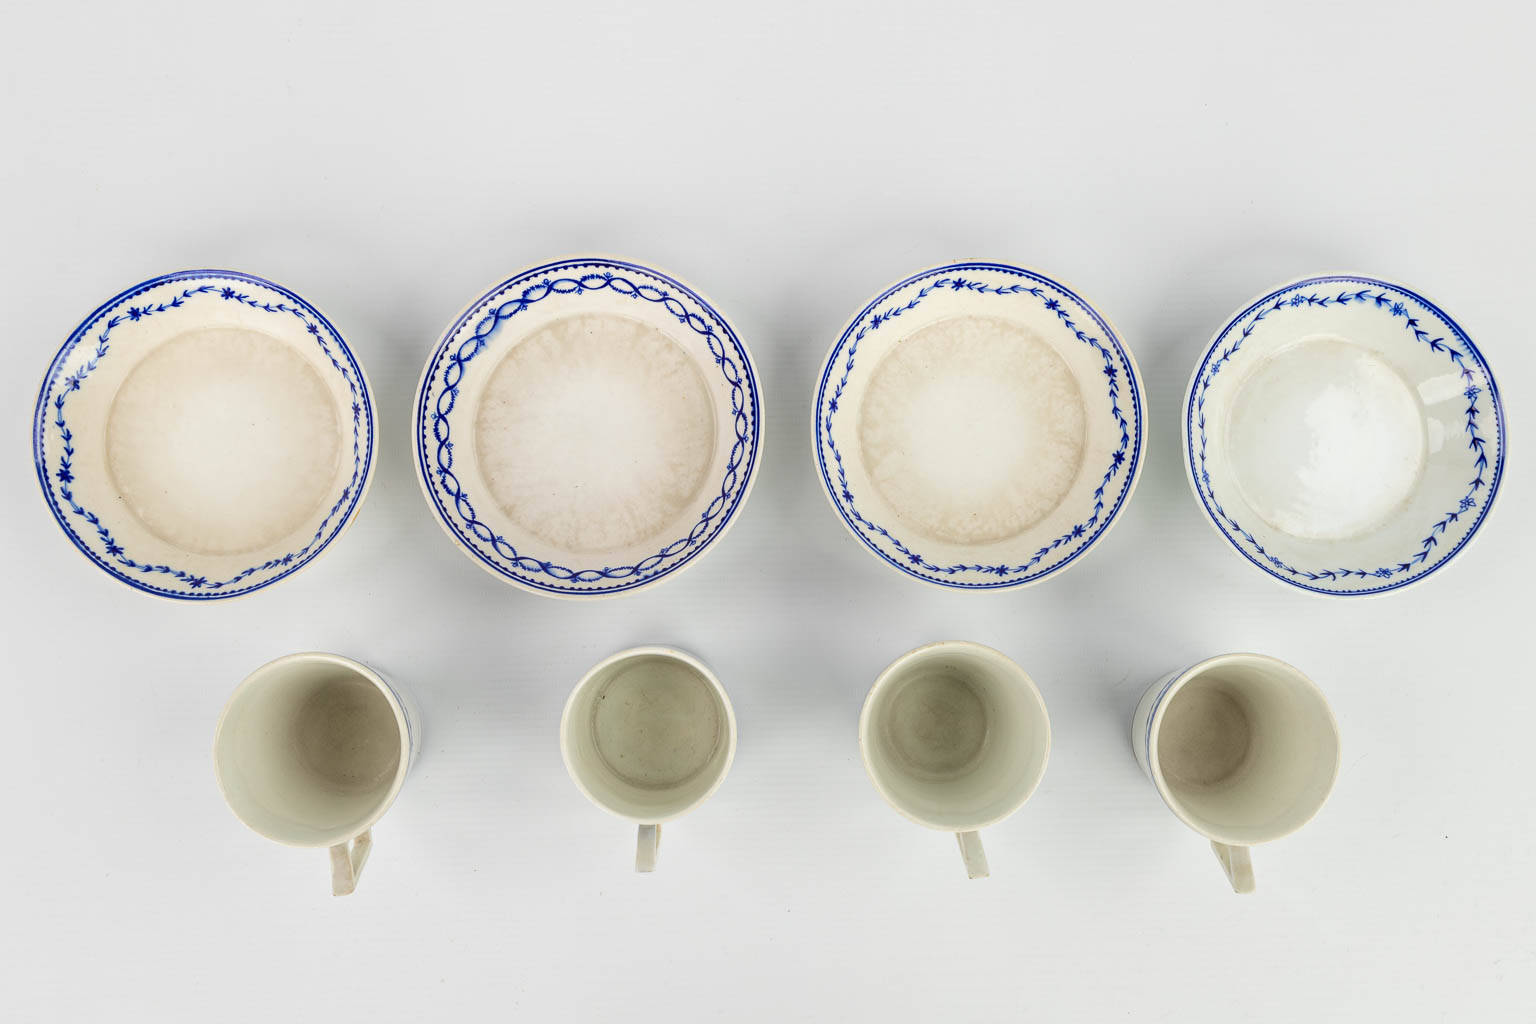 A collection of 3 plates, 4 cups and saucers made in Doornik. The first half of the 19th century. 